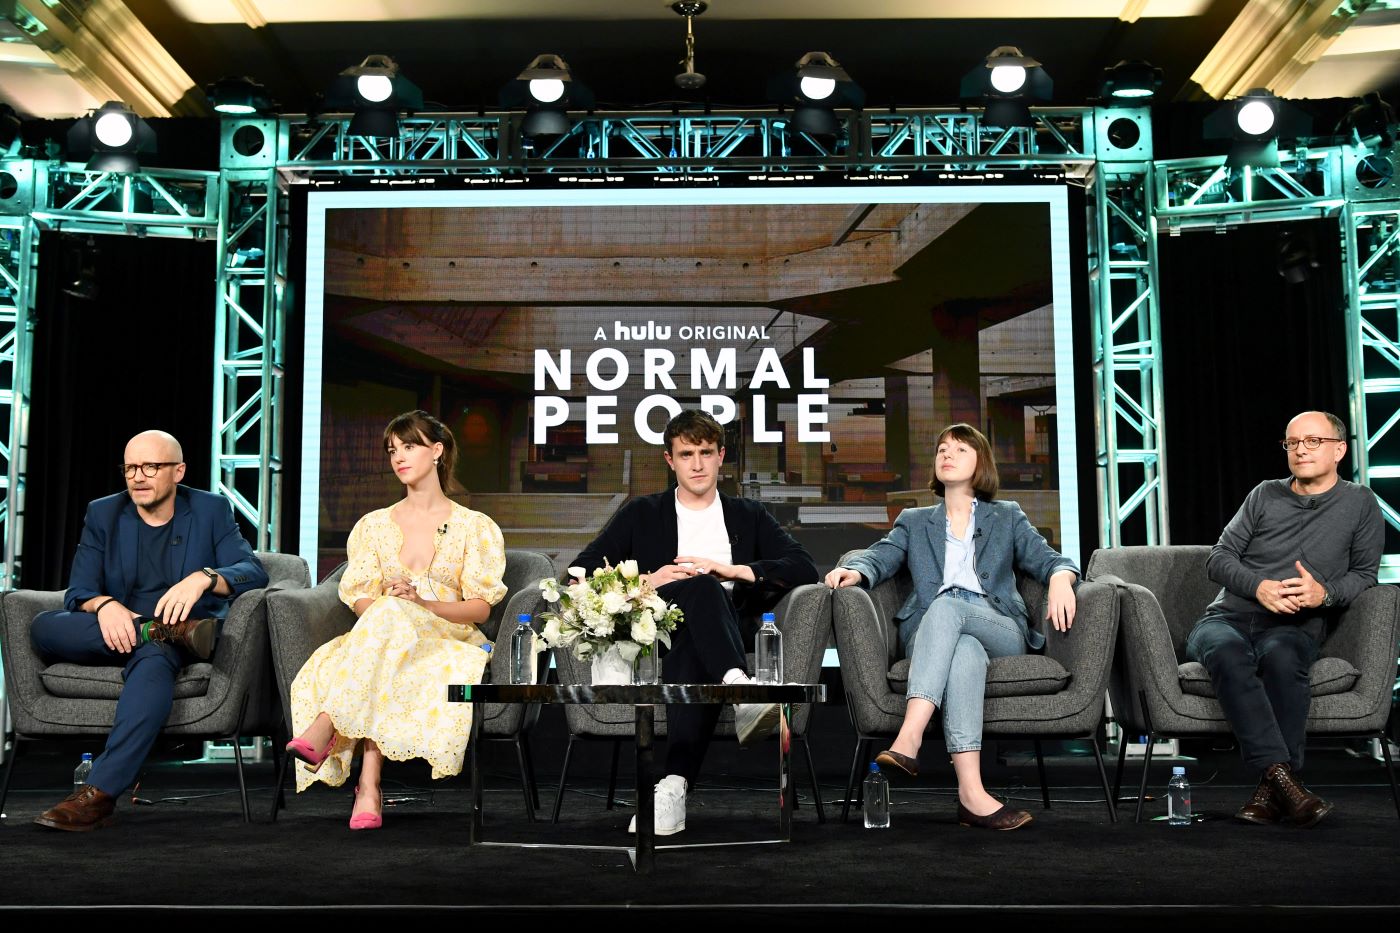 Five cast members sit on a stage in gray chairs behind a black table with water bottles and white flowers in a white vase. The background has industrial beams forming a frame around a projection of an indoor scene with the text, 'A hulu original Normal People' placed on the screen.